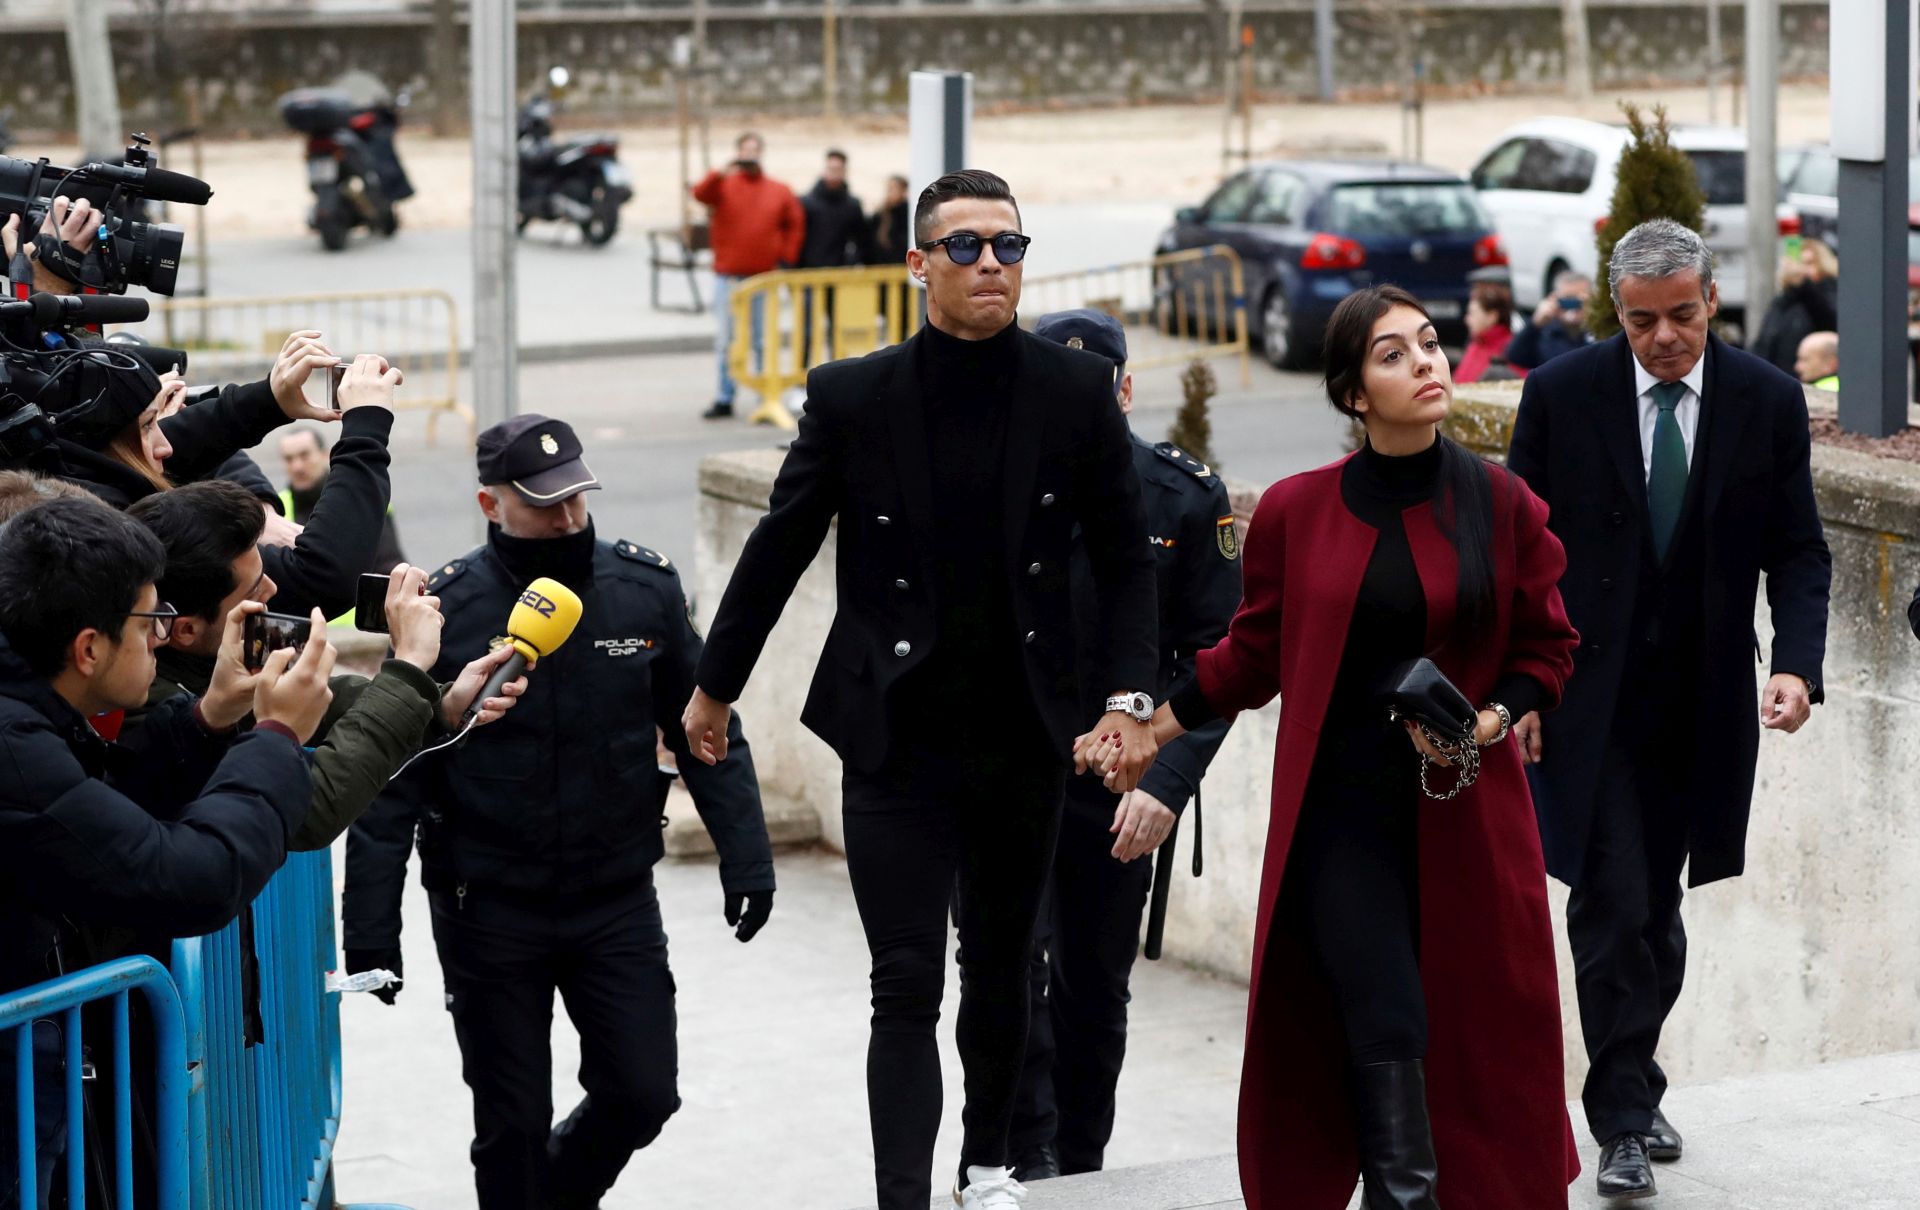 epa07308262 Juventus FC forward Cristiano Ronaldo (C) and his partner Georgina Rodriguez arrive to a court in Madrid, Spain, 22 January 2019. Ronaldo is facing tax fraud charges related to his time at Real Madrid.  EPA/Emilio Naranjo